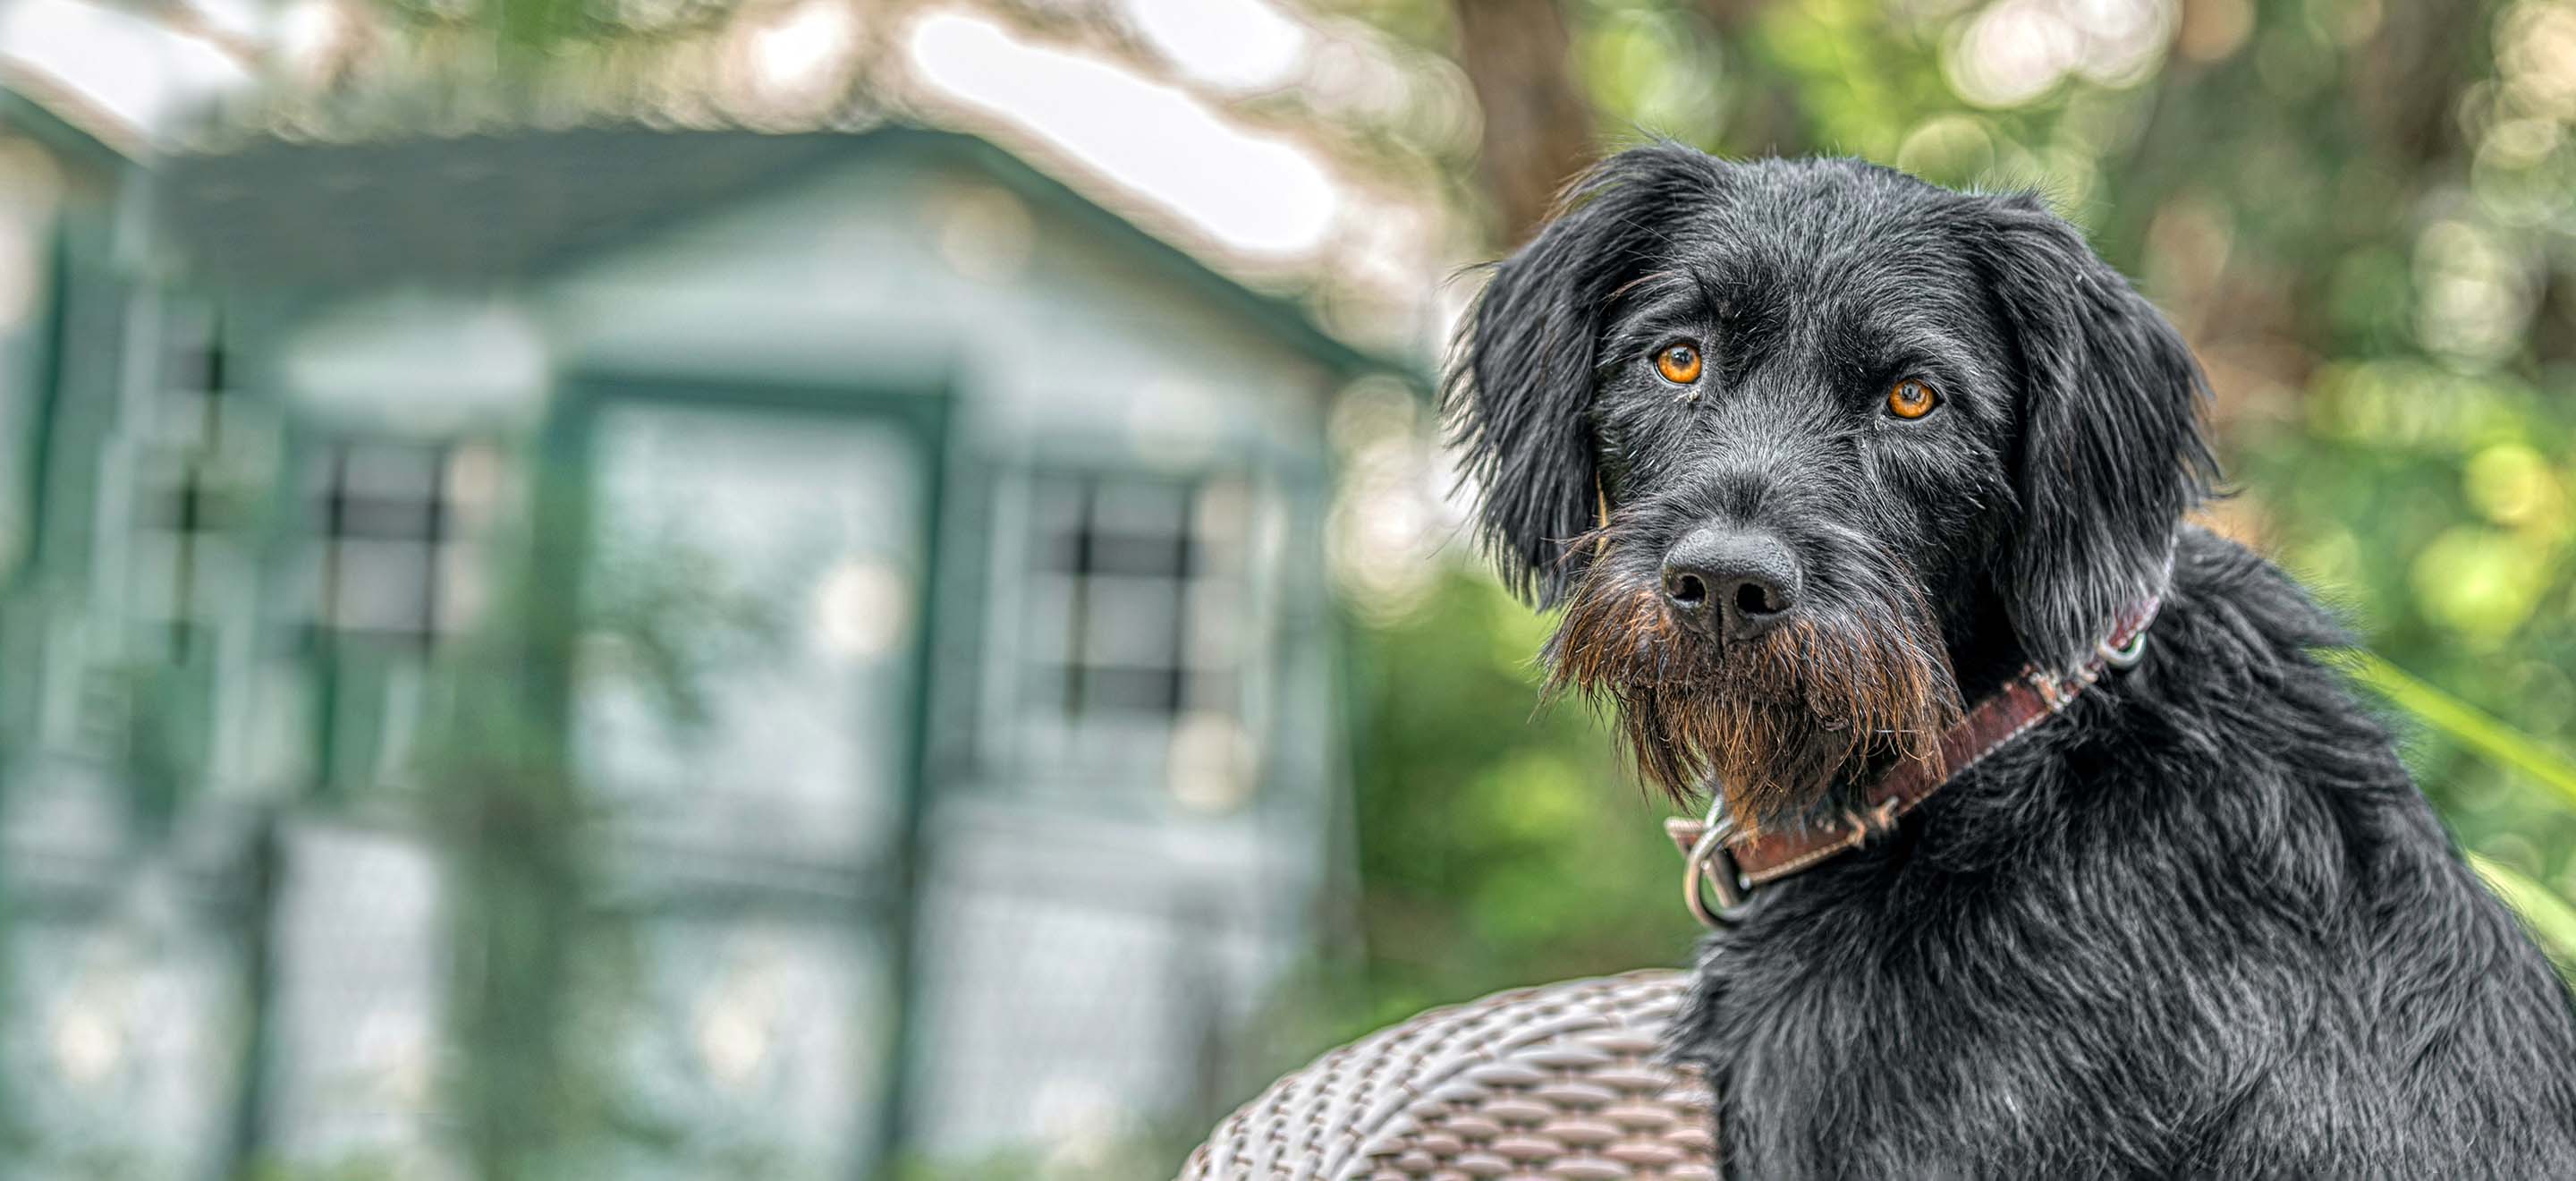 A black German Wirehaired Pointer dog with a brown beard sitting in a wicker chair outside image